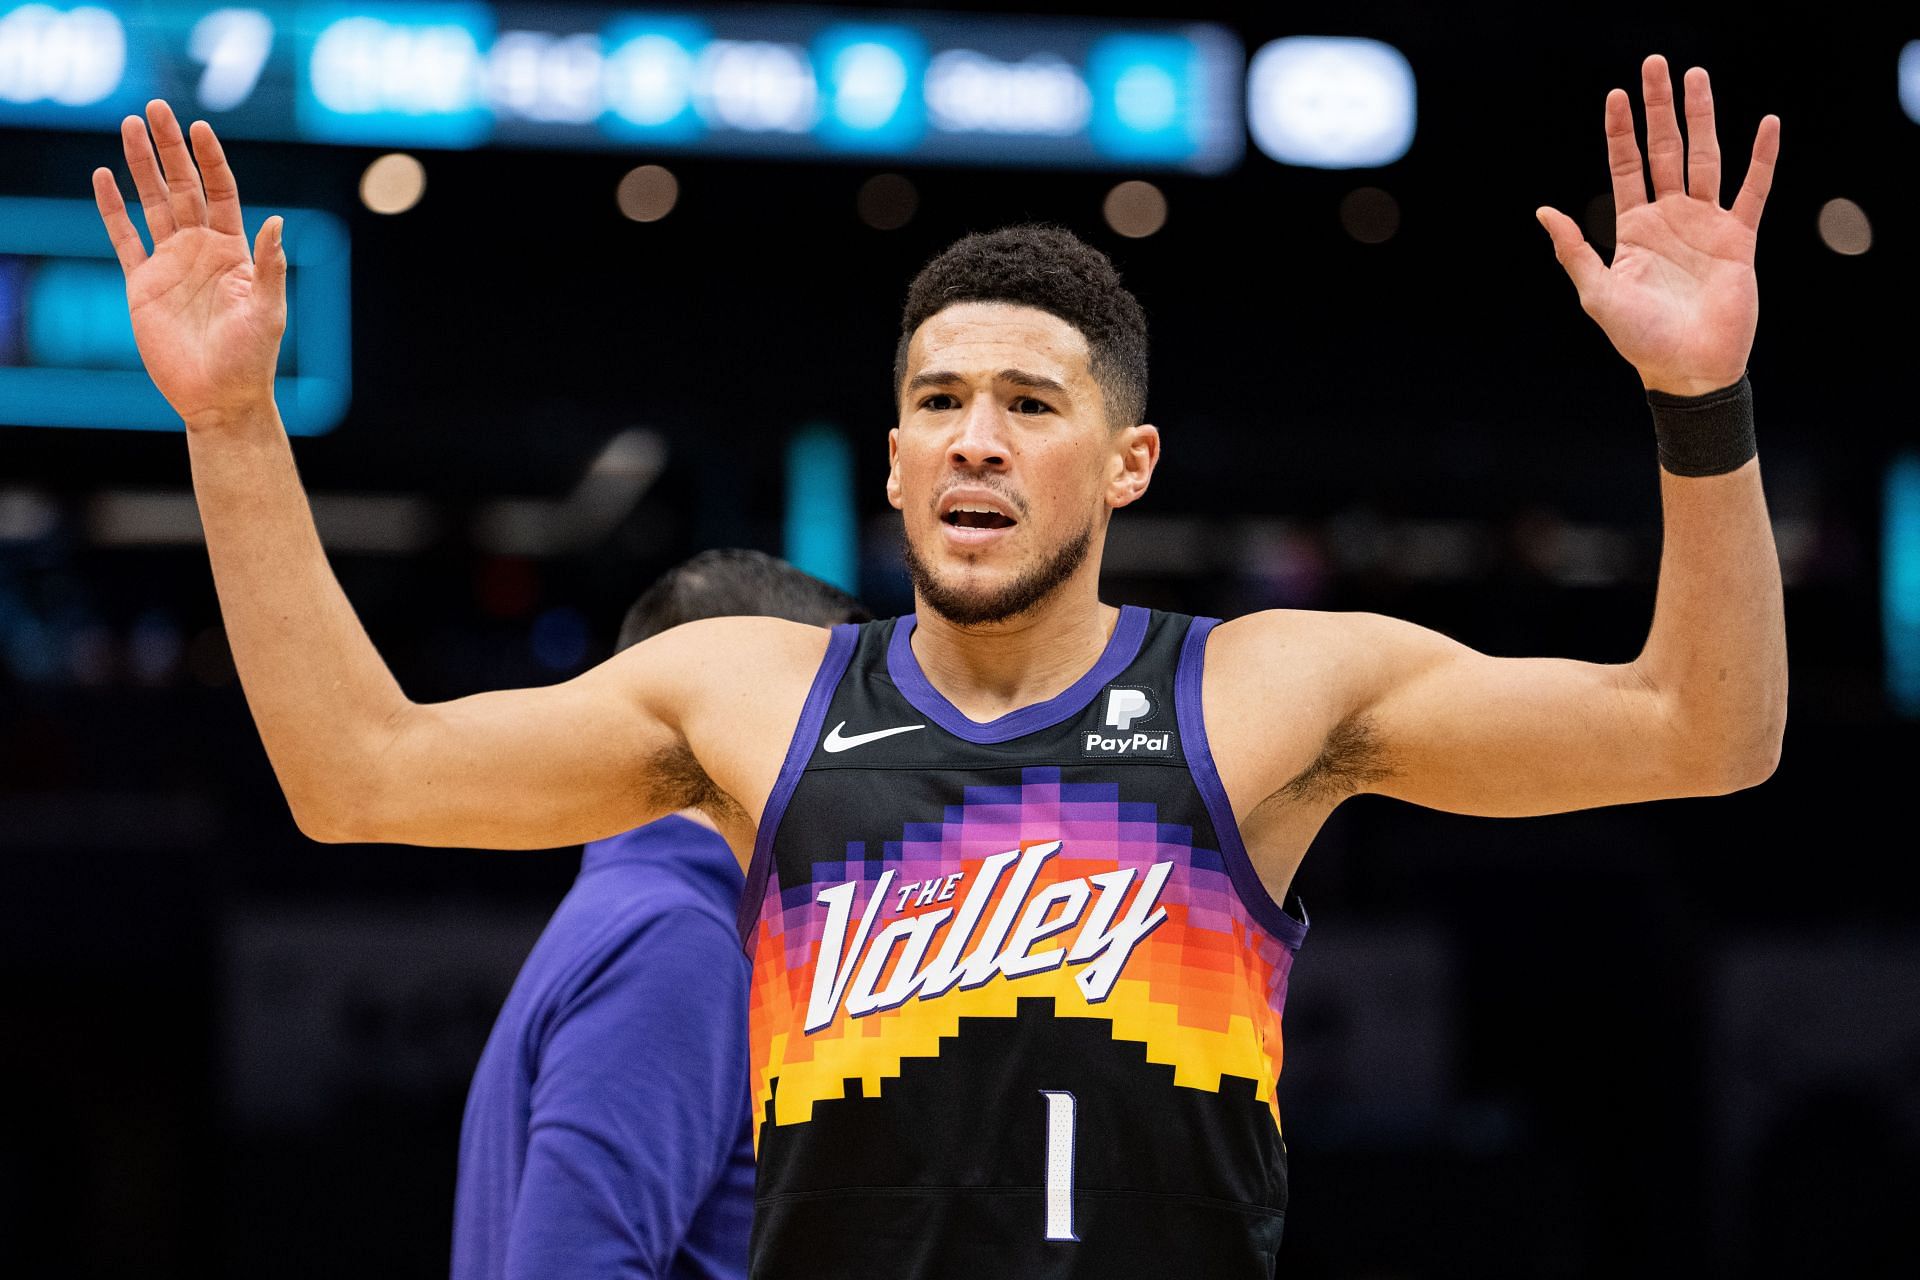 Phoenix Suns' Devin Booker reacts to the referee's decision during a game against the Charlotte Hornets on January 2 in Charlotte, North Carolina.